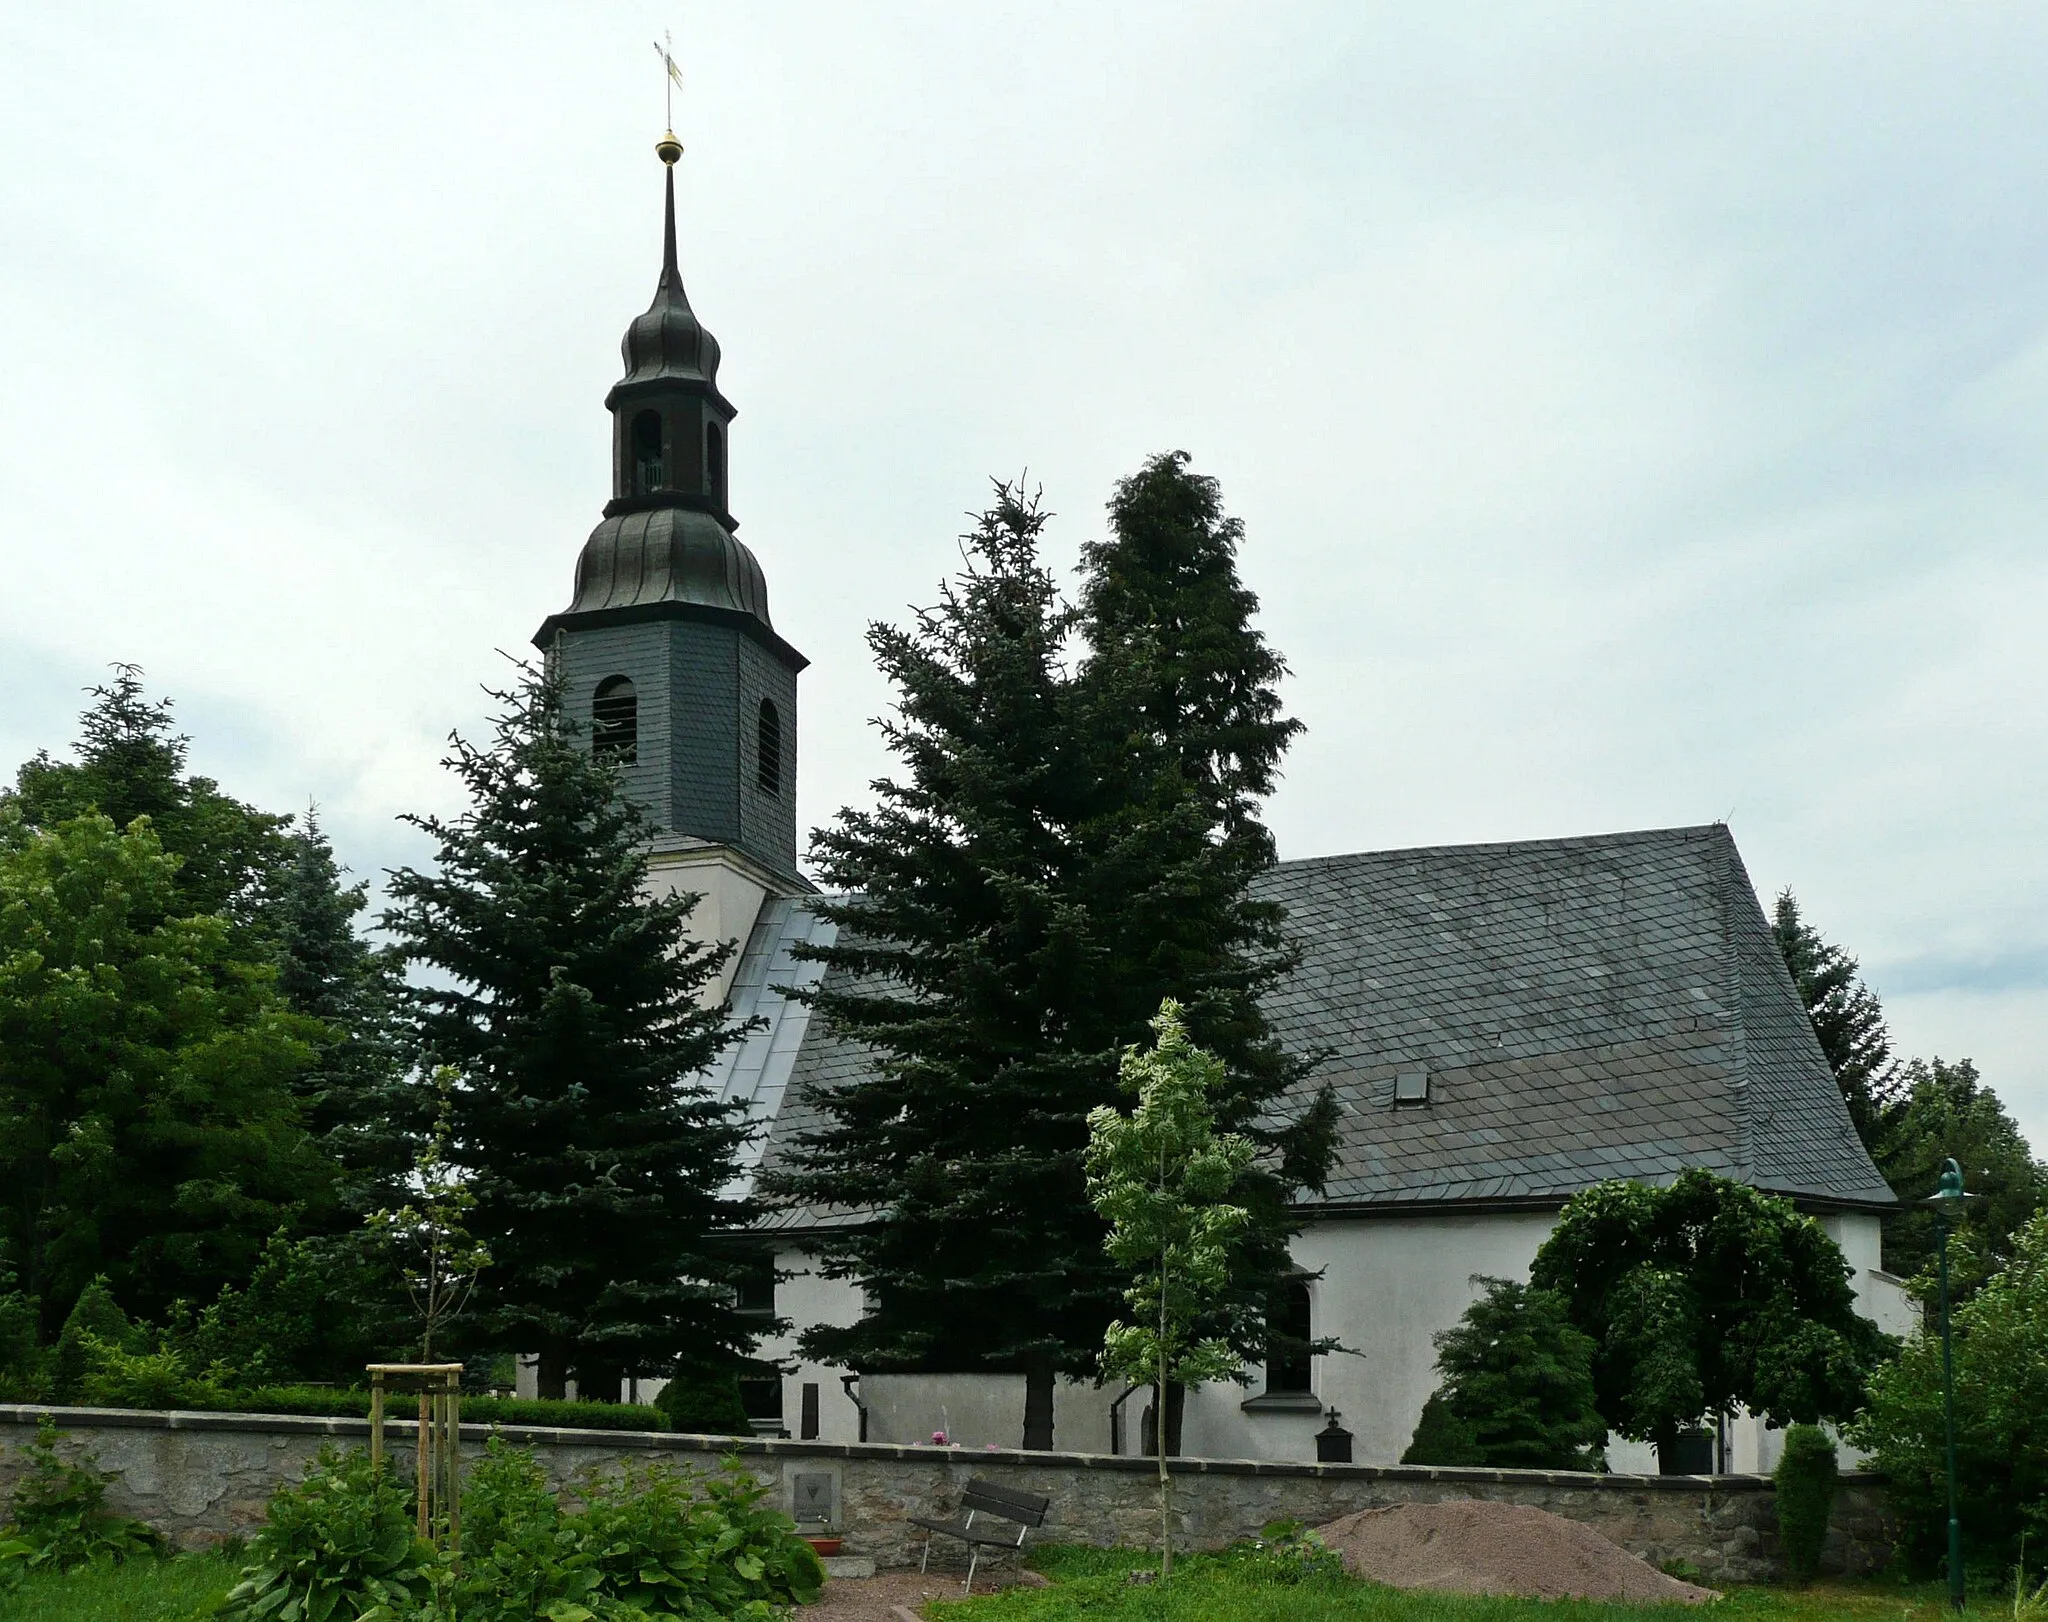 Photo showing: This image shows the evangelic church (built 1591/93) in Schellerhau near Altenberg in the Ore Mountains in Saxony, Germany.